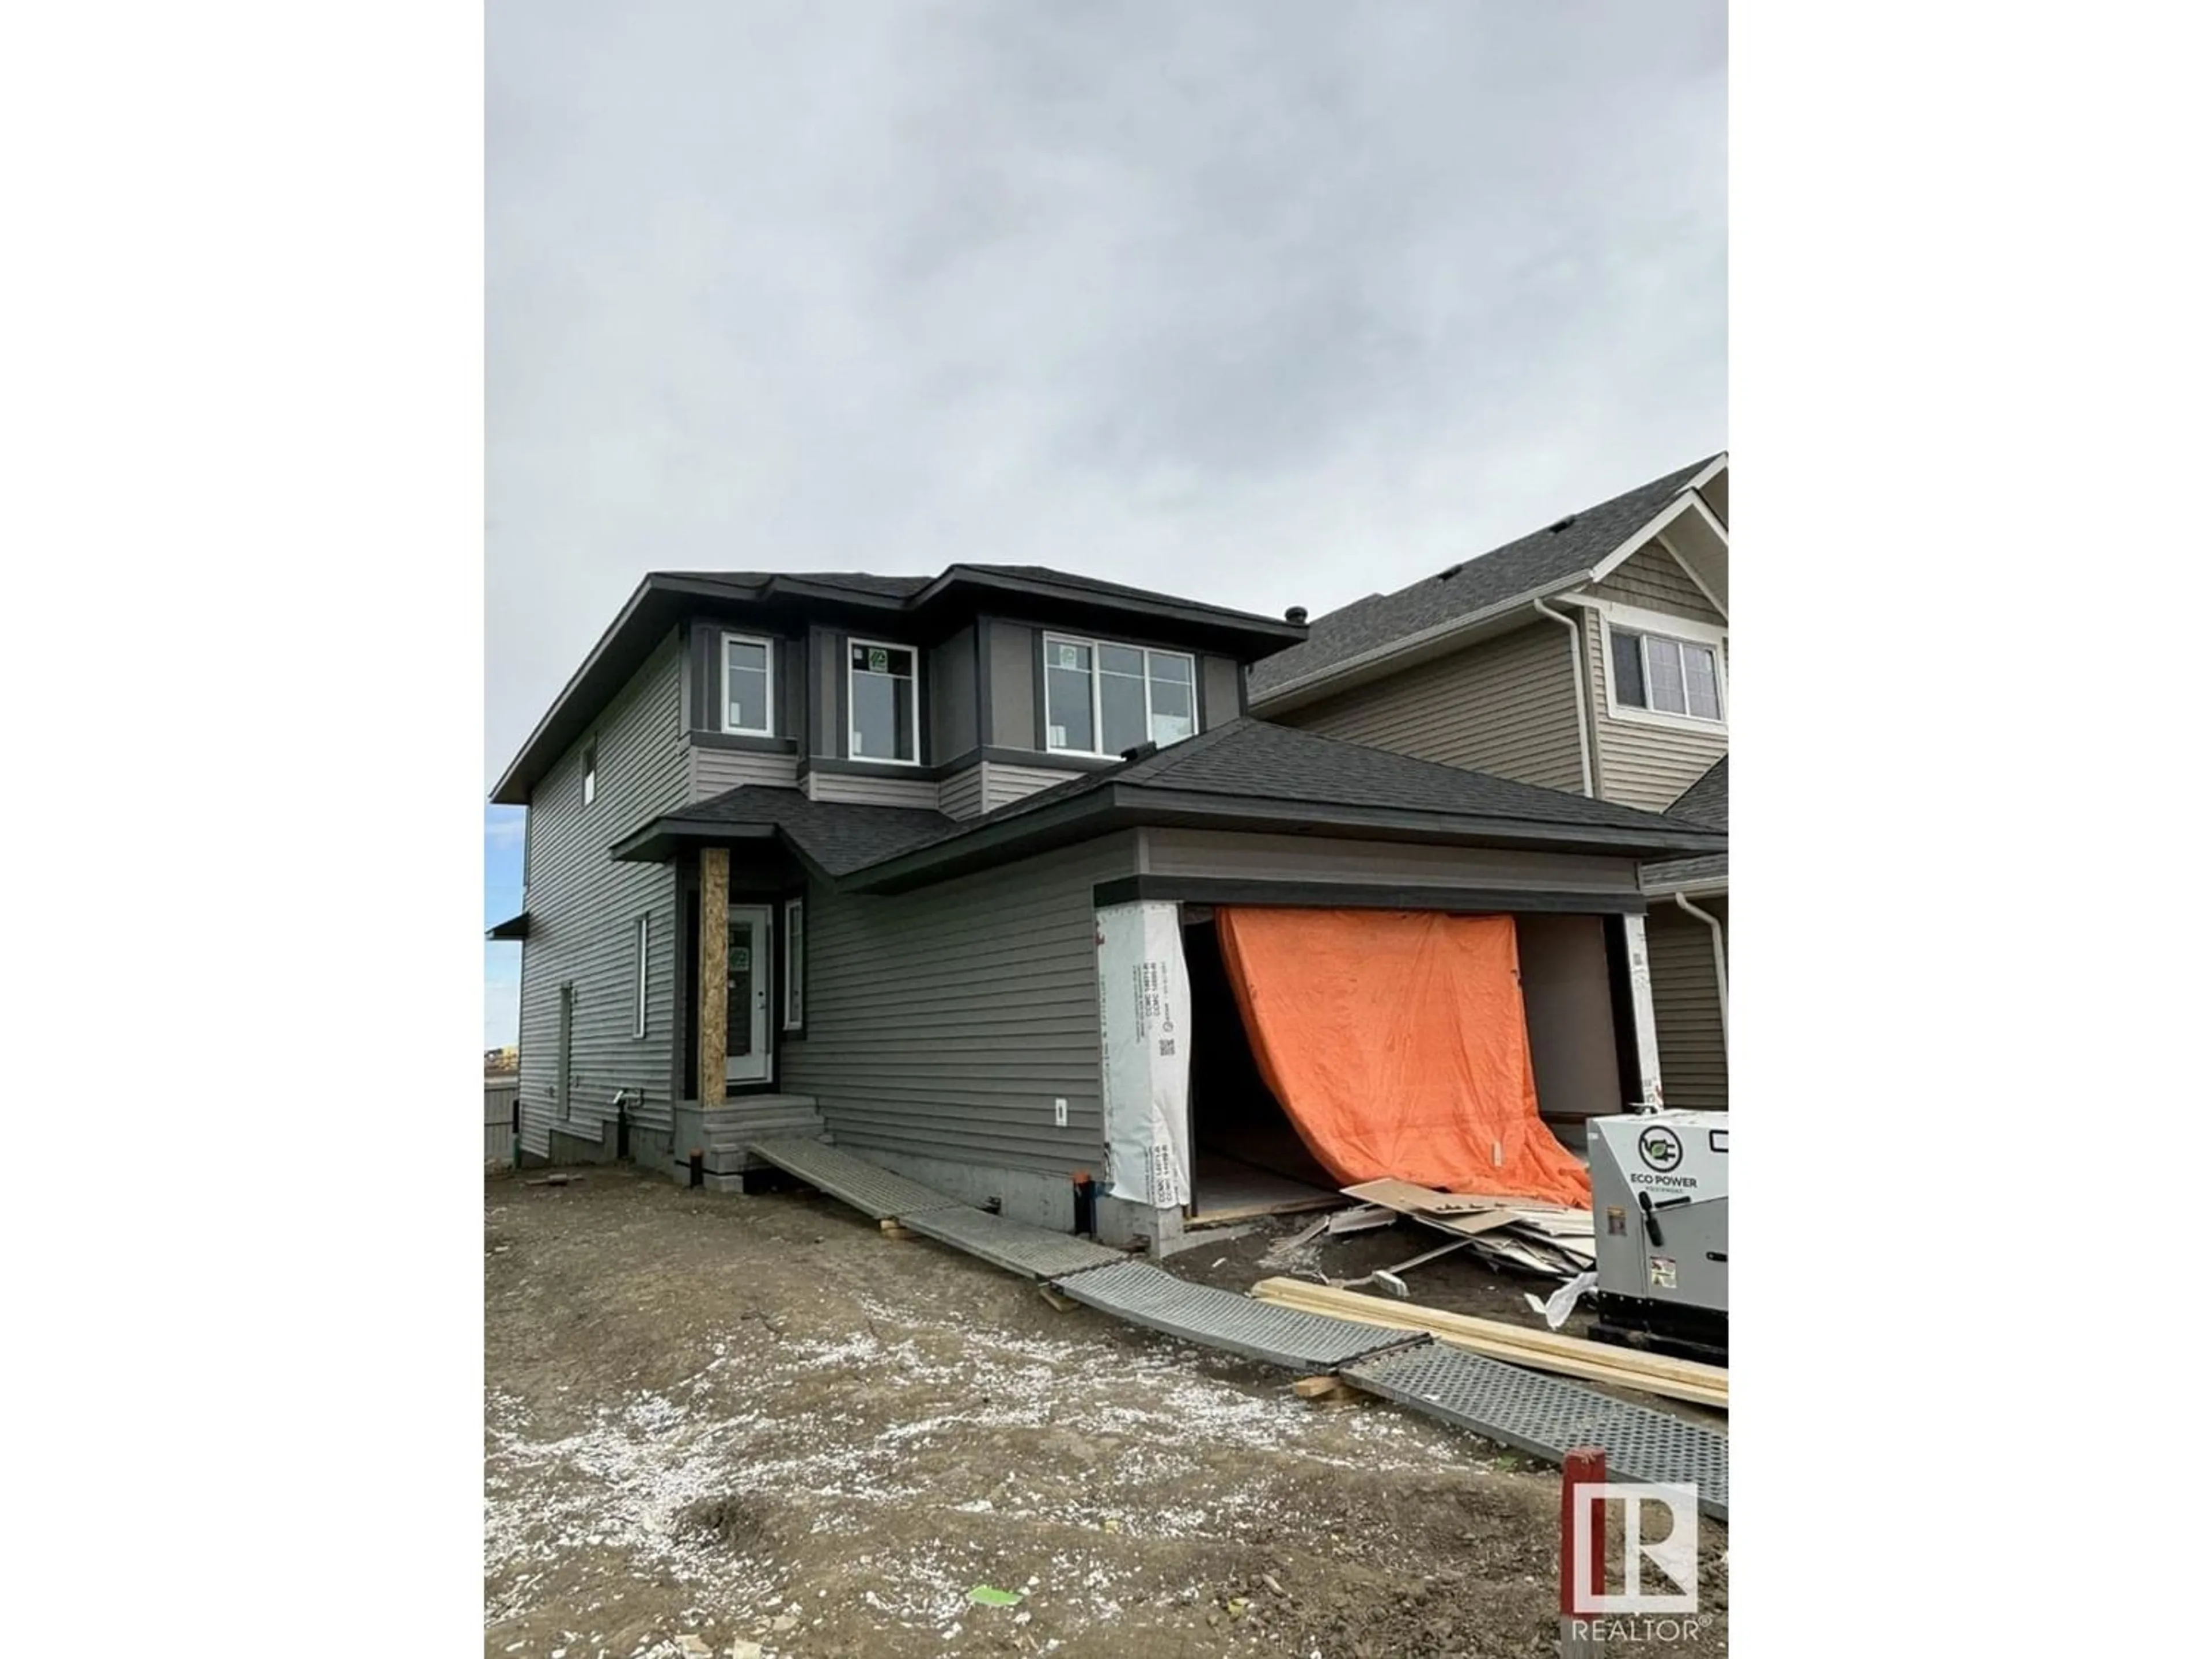 Frontside or backside of a home for 17411 2 ST NW, Edmonton Alberta T5Y4G6